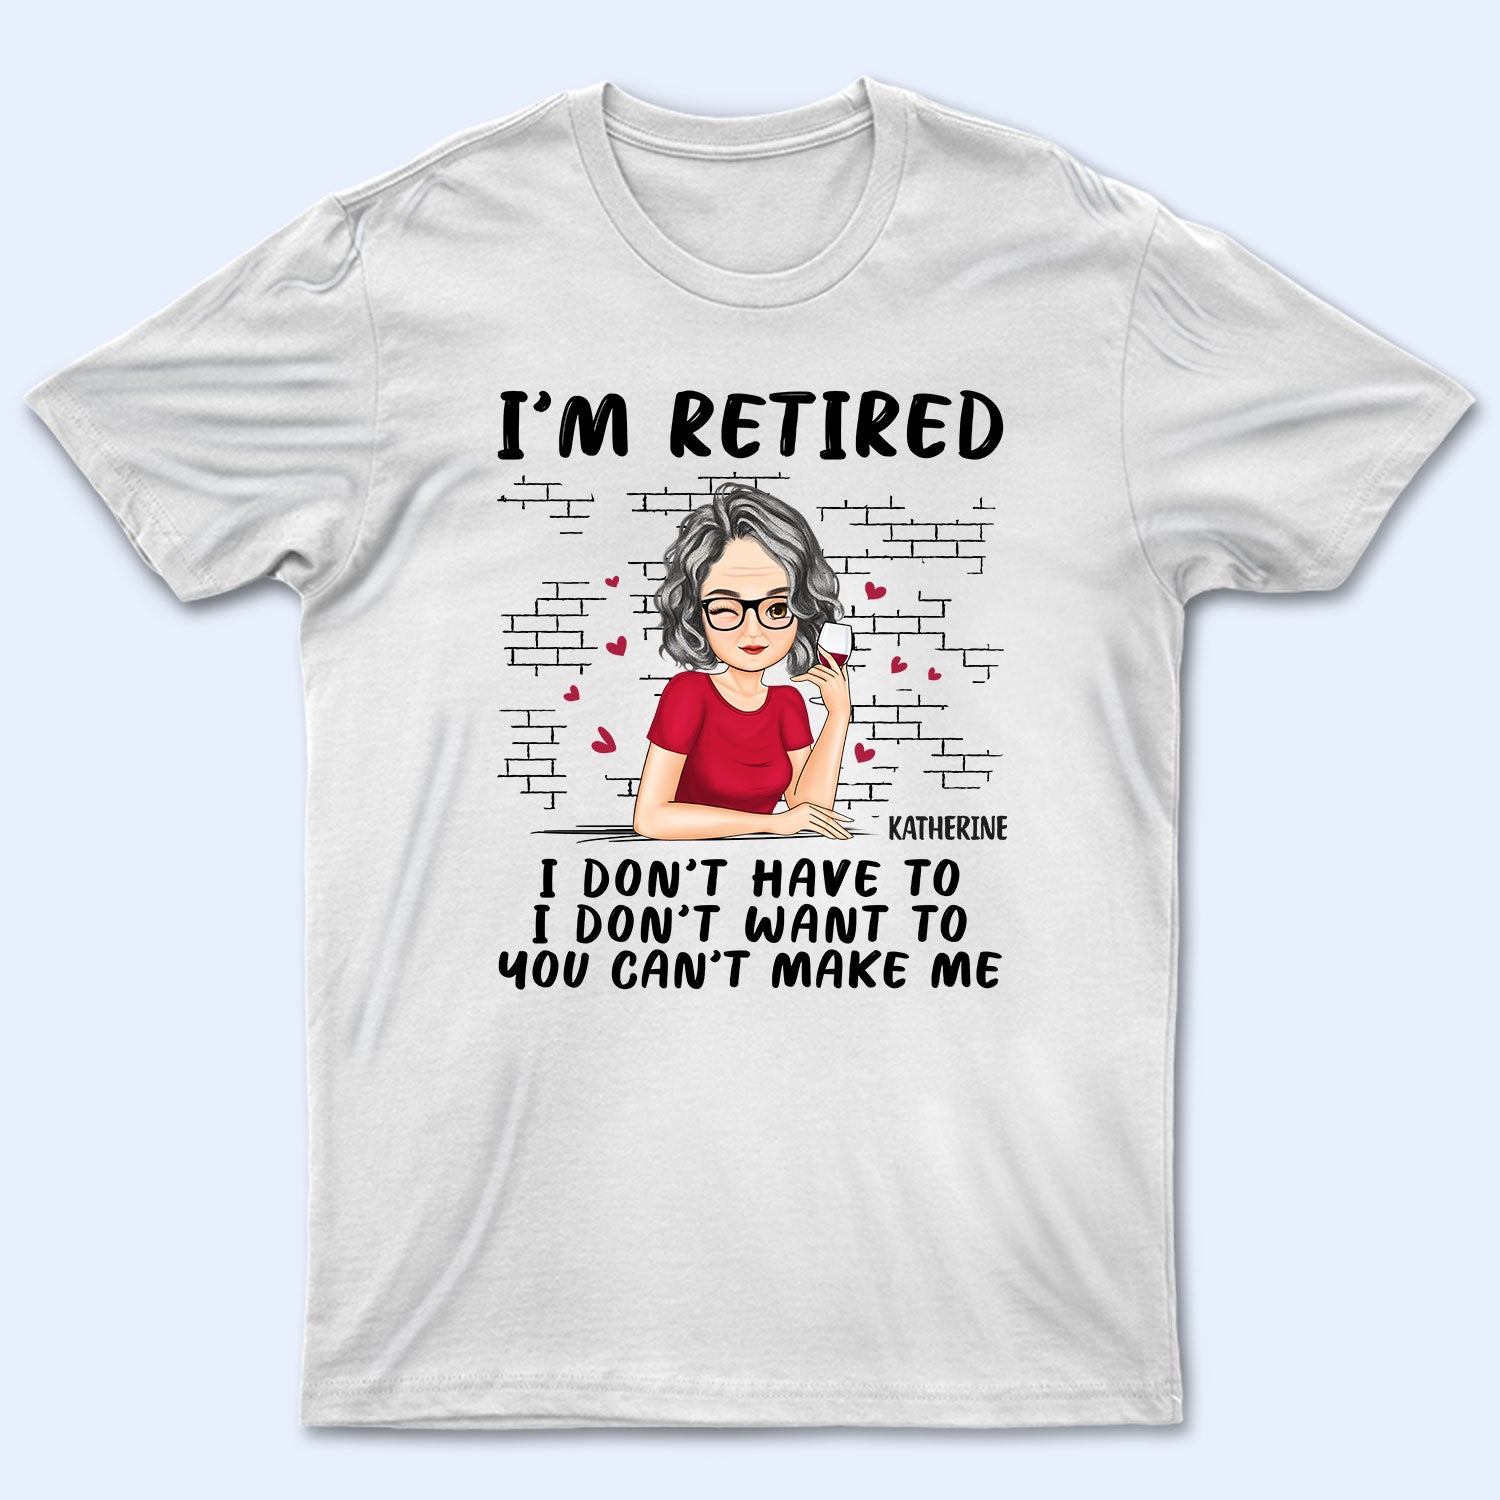 I'm Retired - Gift For Retiree, Retirement Gift - Personalized T Shirt